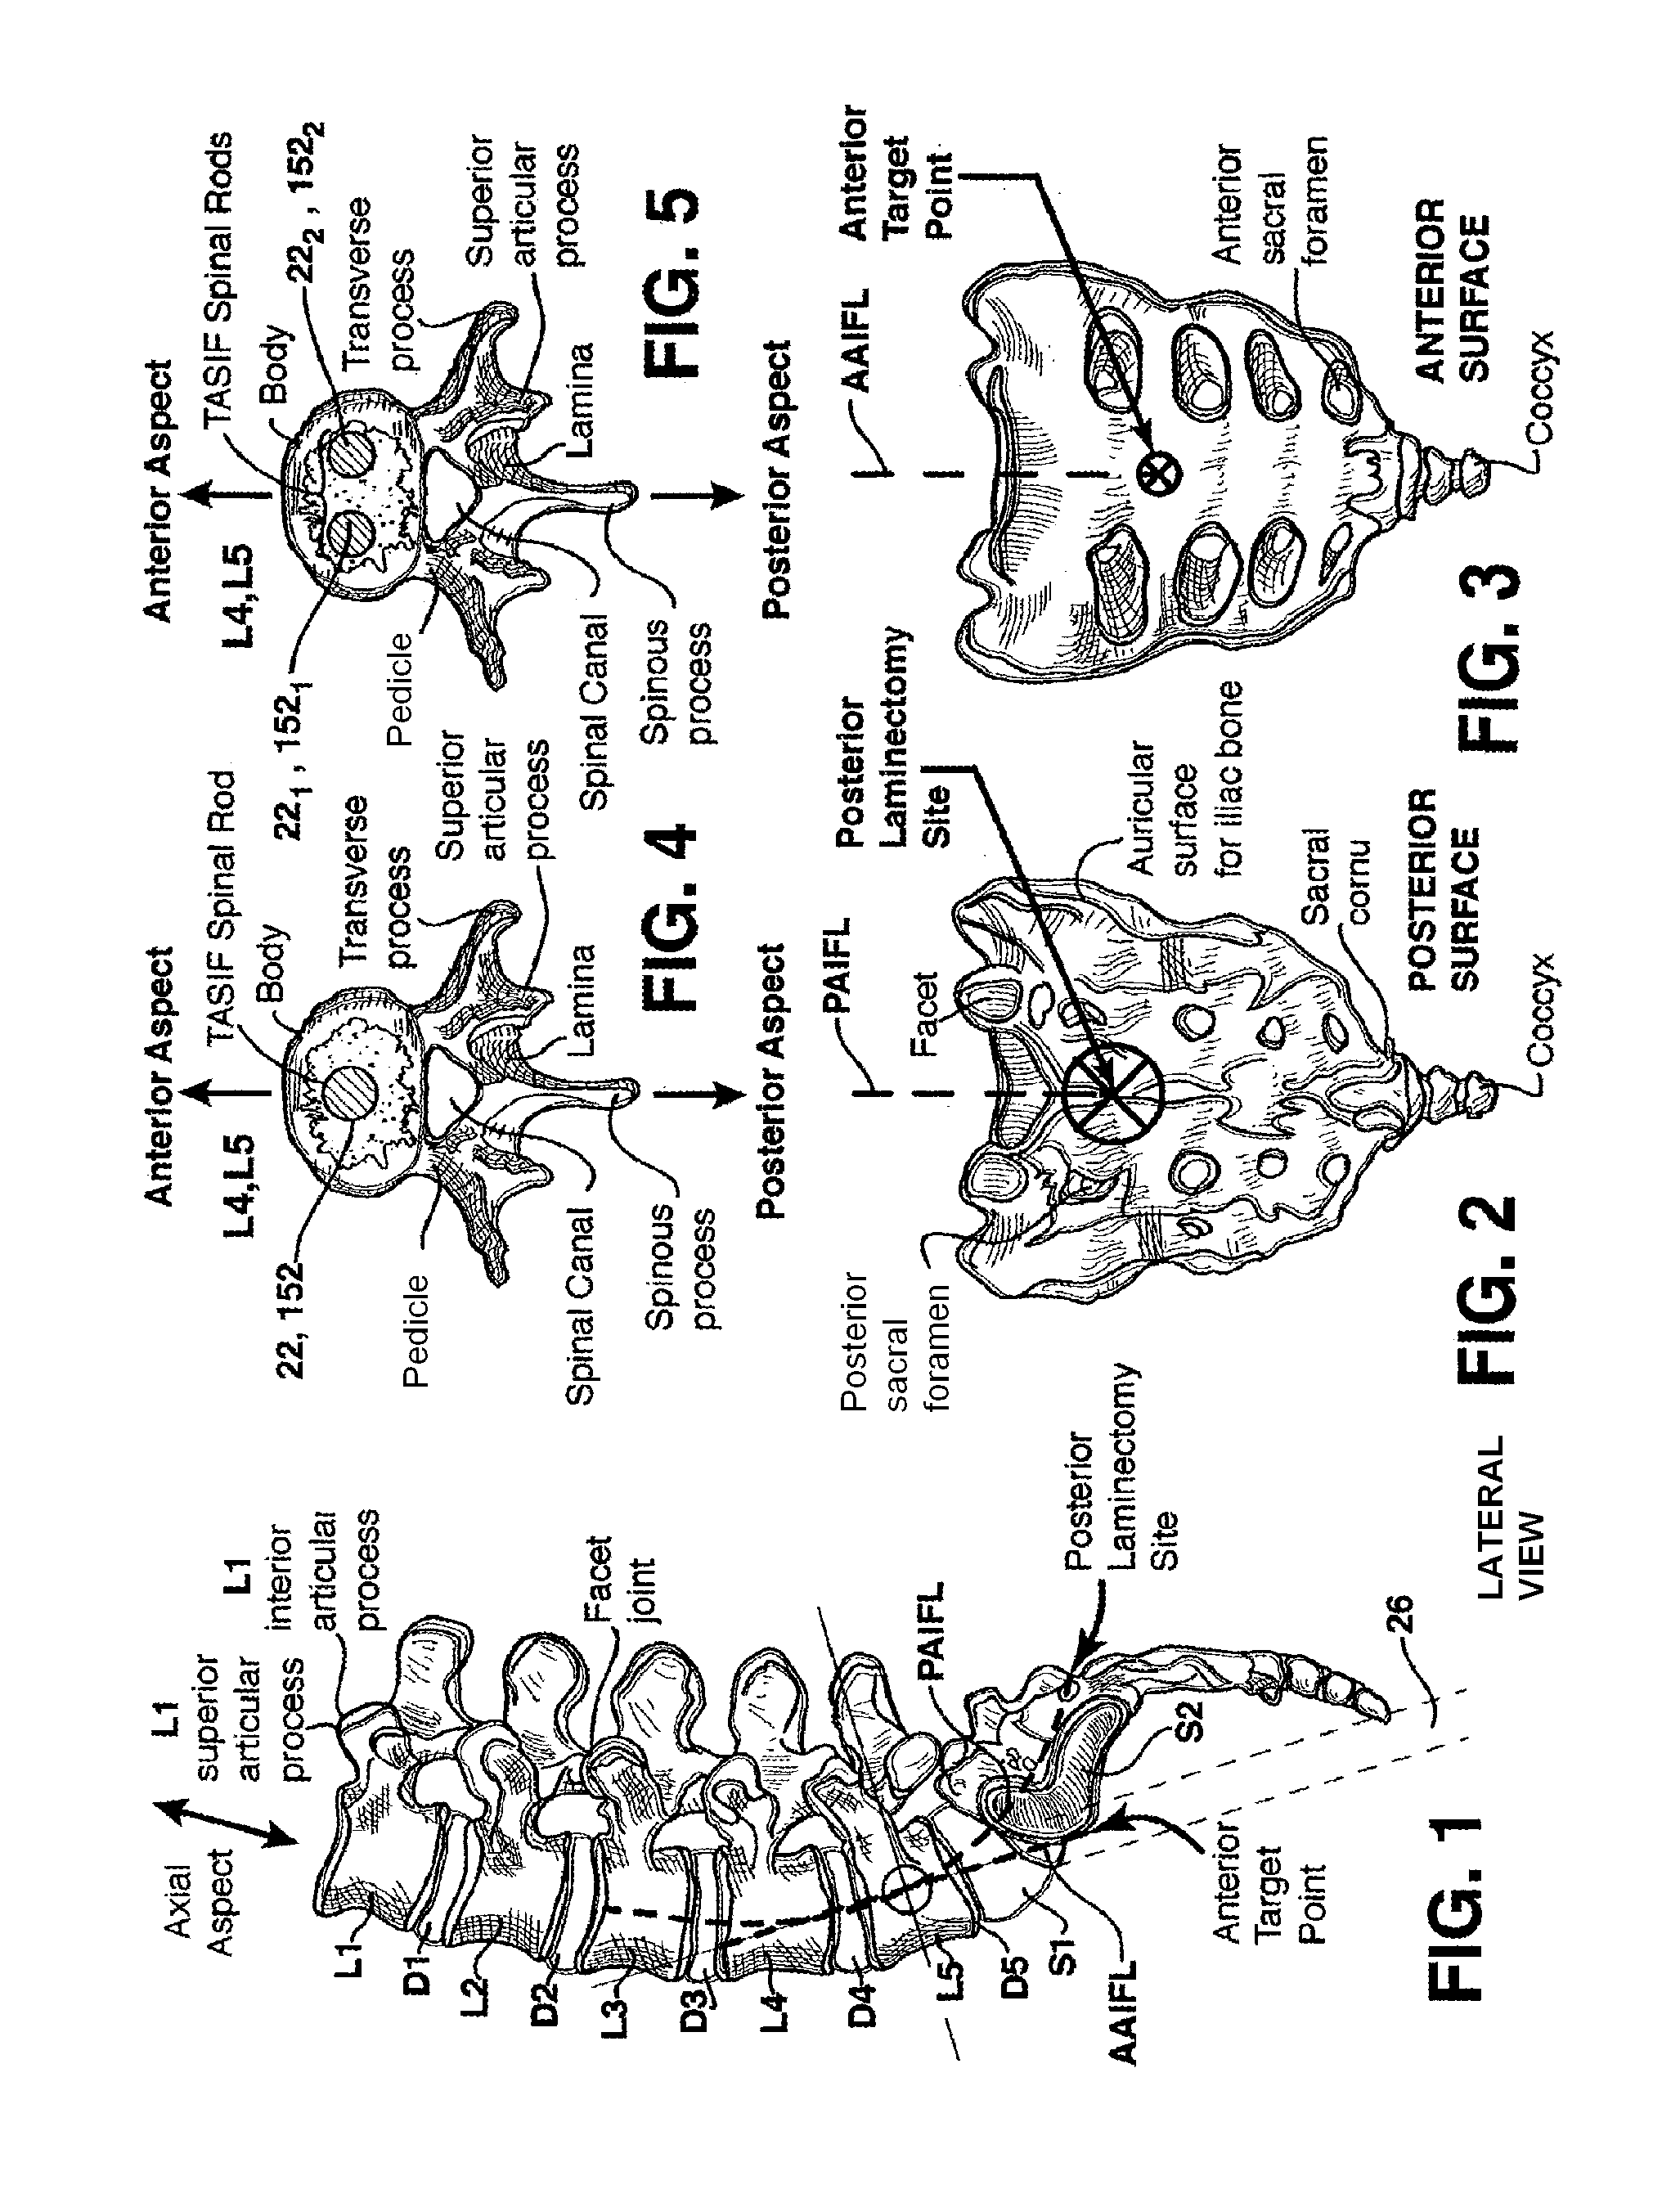 Method and apparatus for providing access to a presacral space